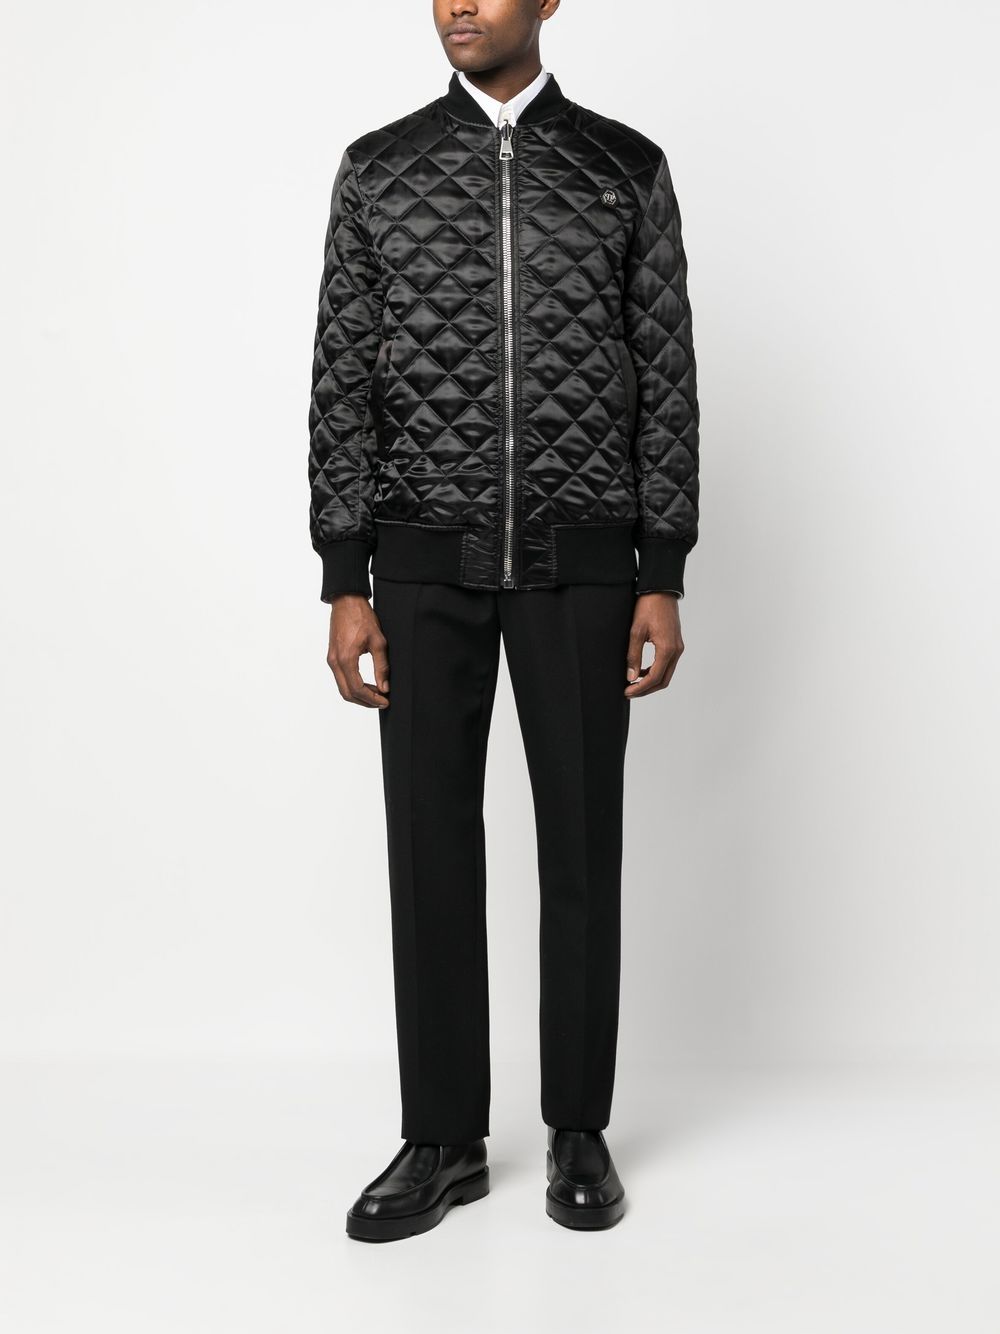 Philipp Plein Reversible Quilted Bomber Jacket - Farfetch